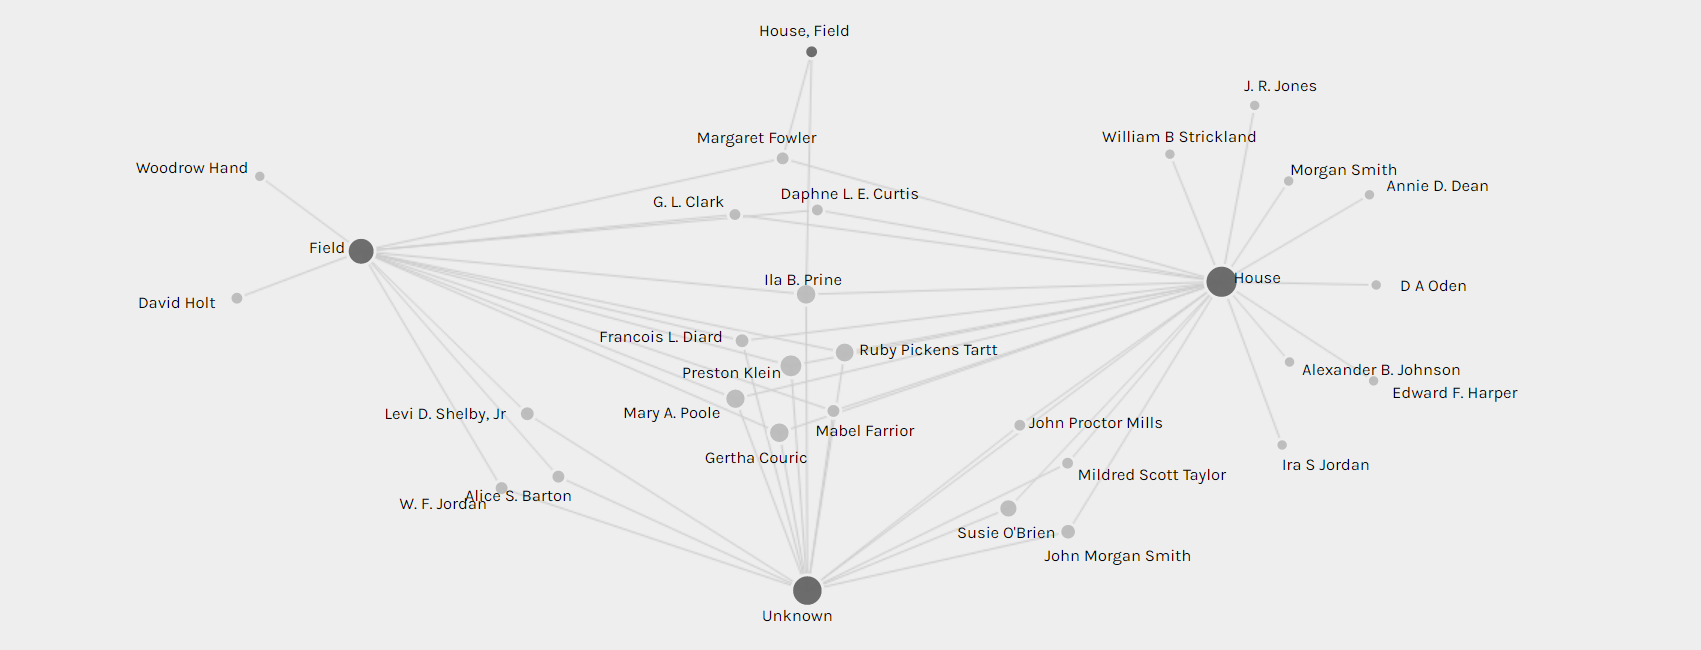 Palladio network depicting relationship between Alabama WPA Slave Narrative interviewers and slave type interviewed (house/field/unknown/house, field).